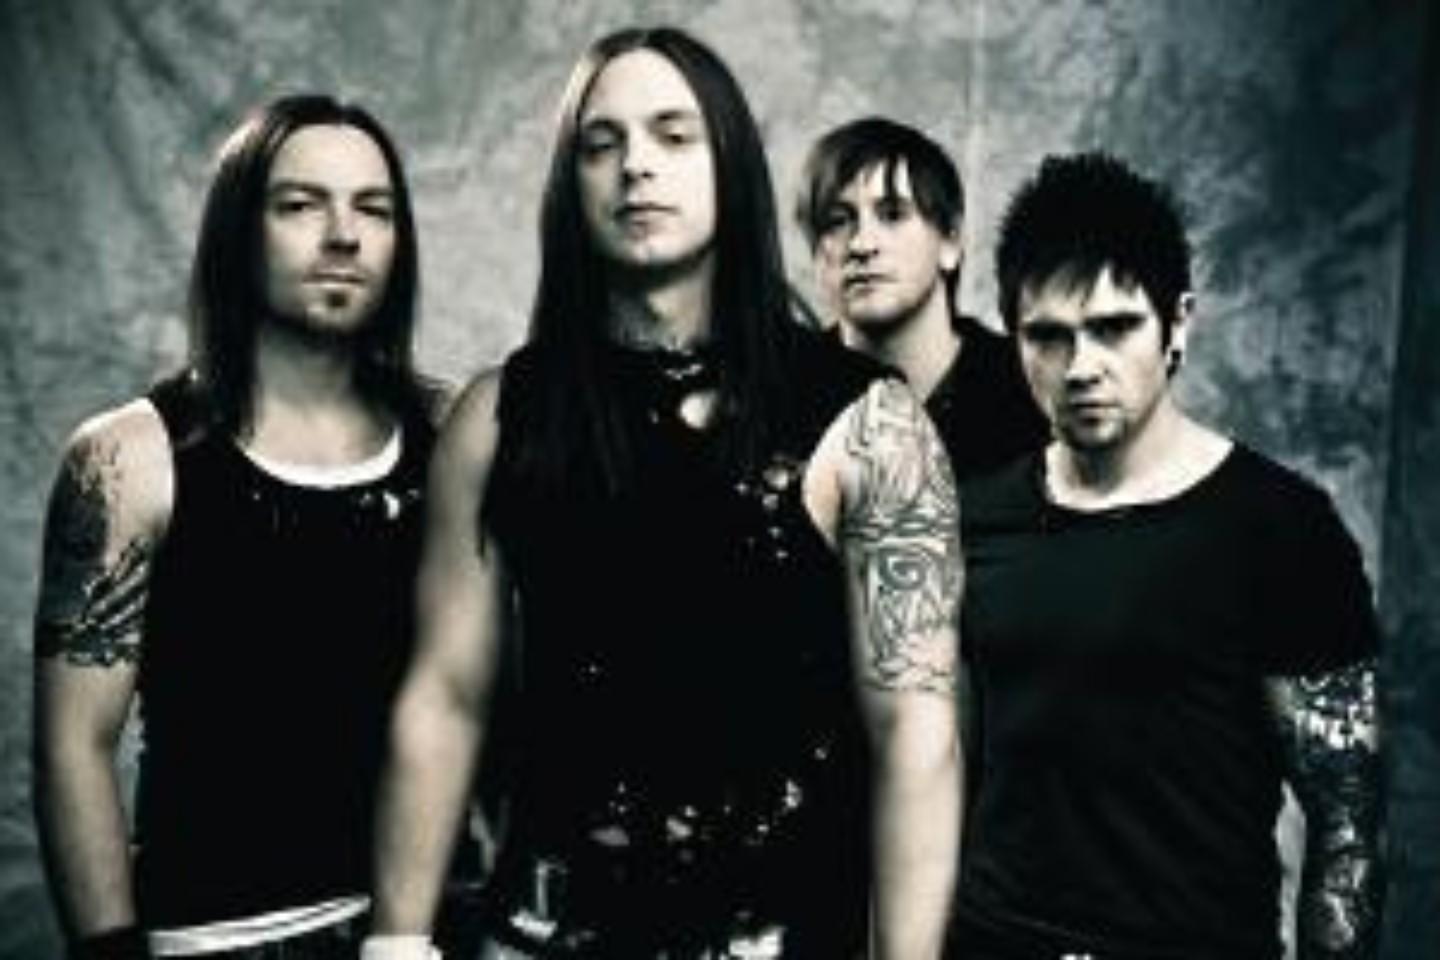 bullet for my valentine tour florida